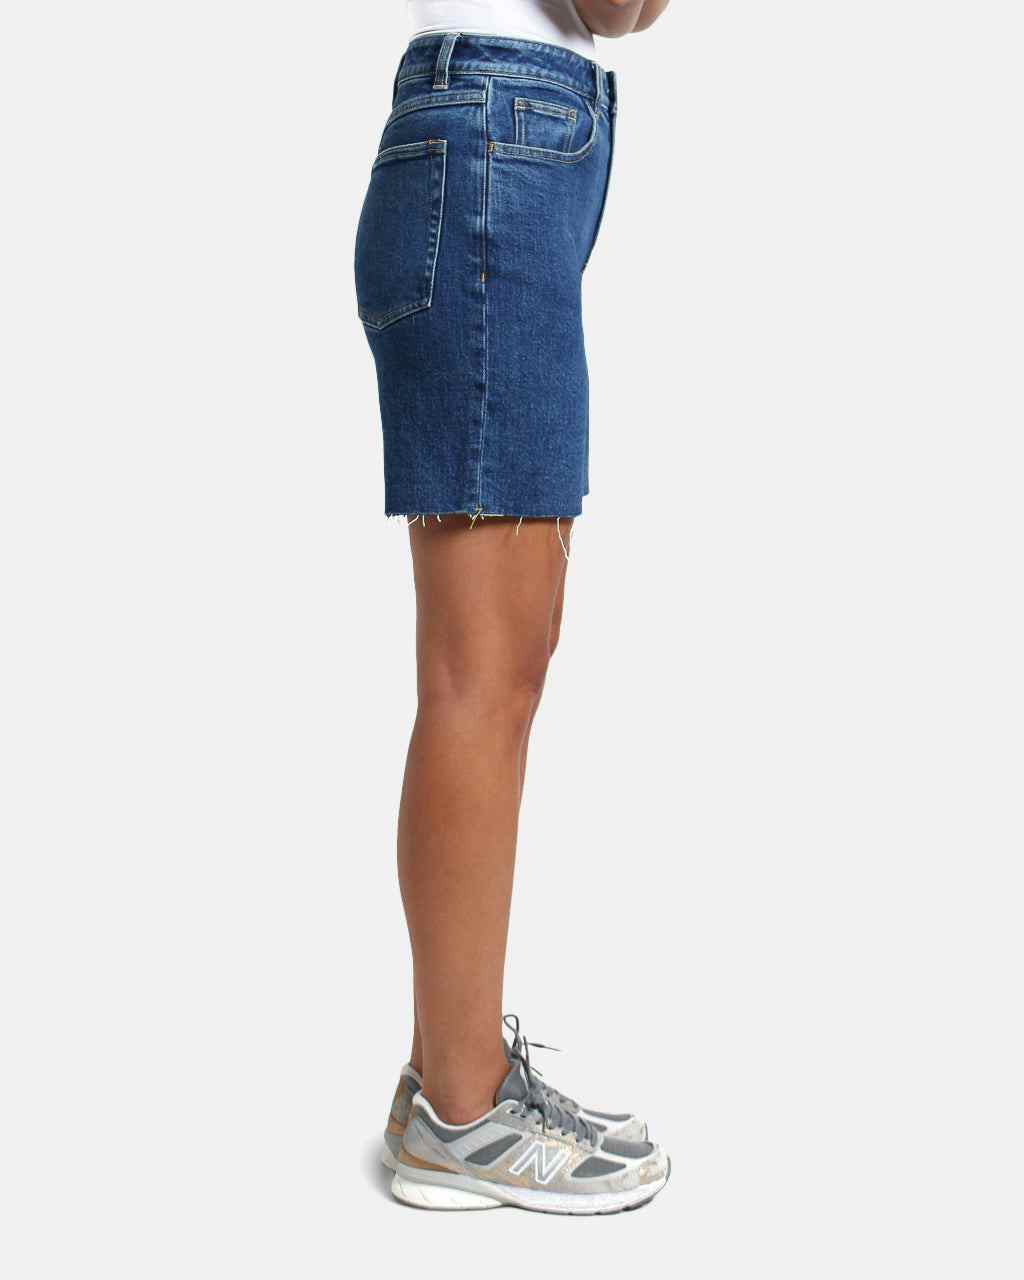 Easy shorts in unspun mid